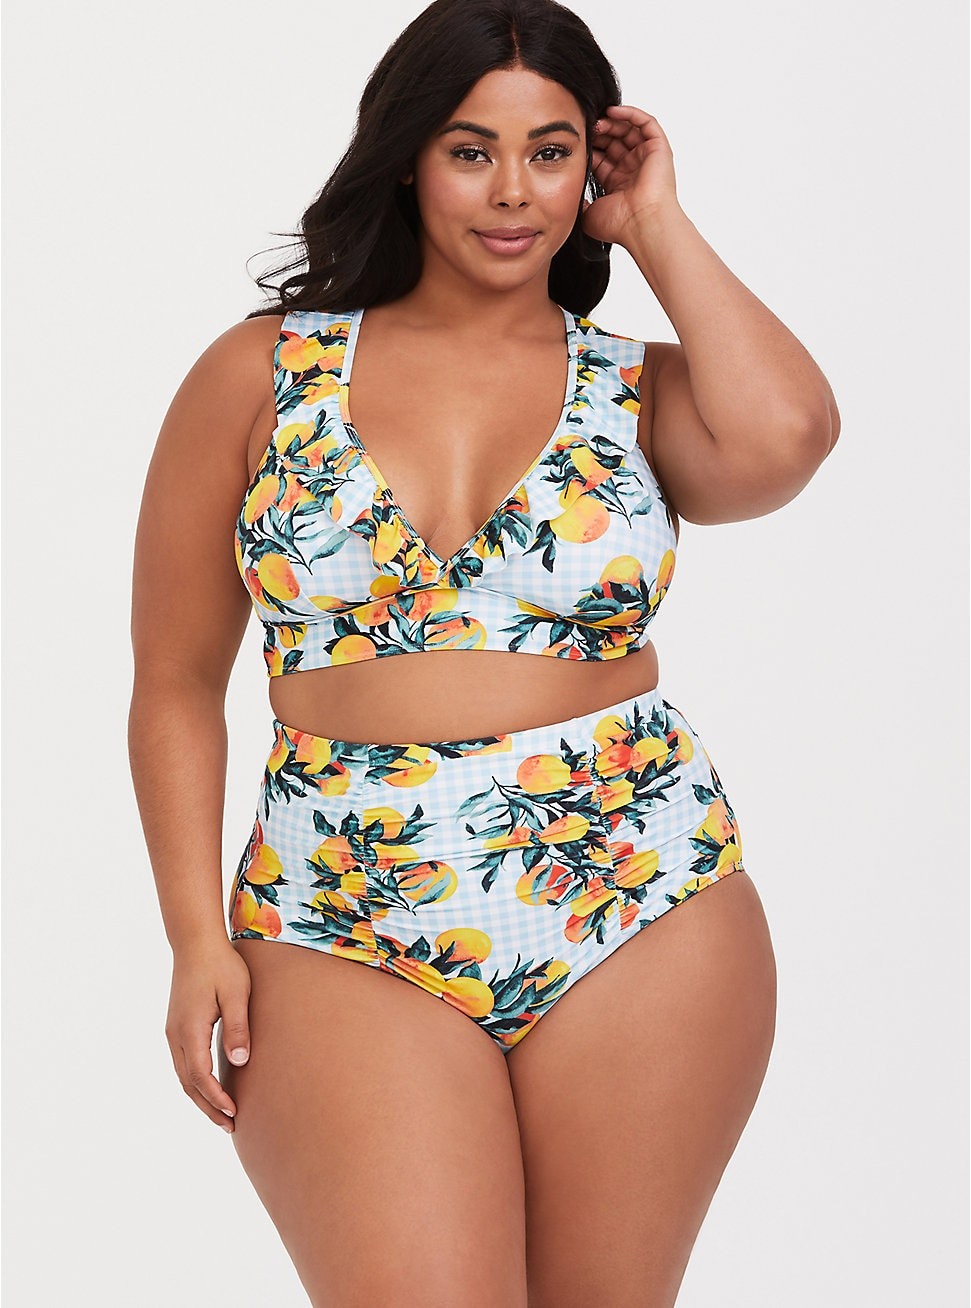 71 Swimsuits For Curvy Women That'll 